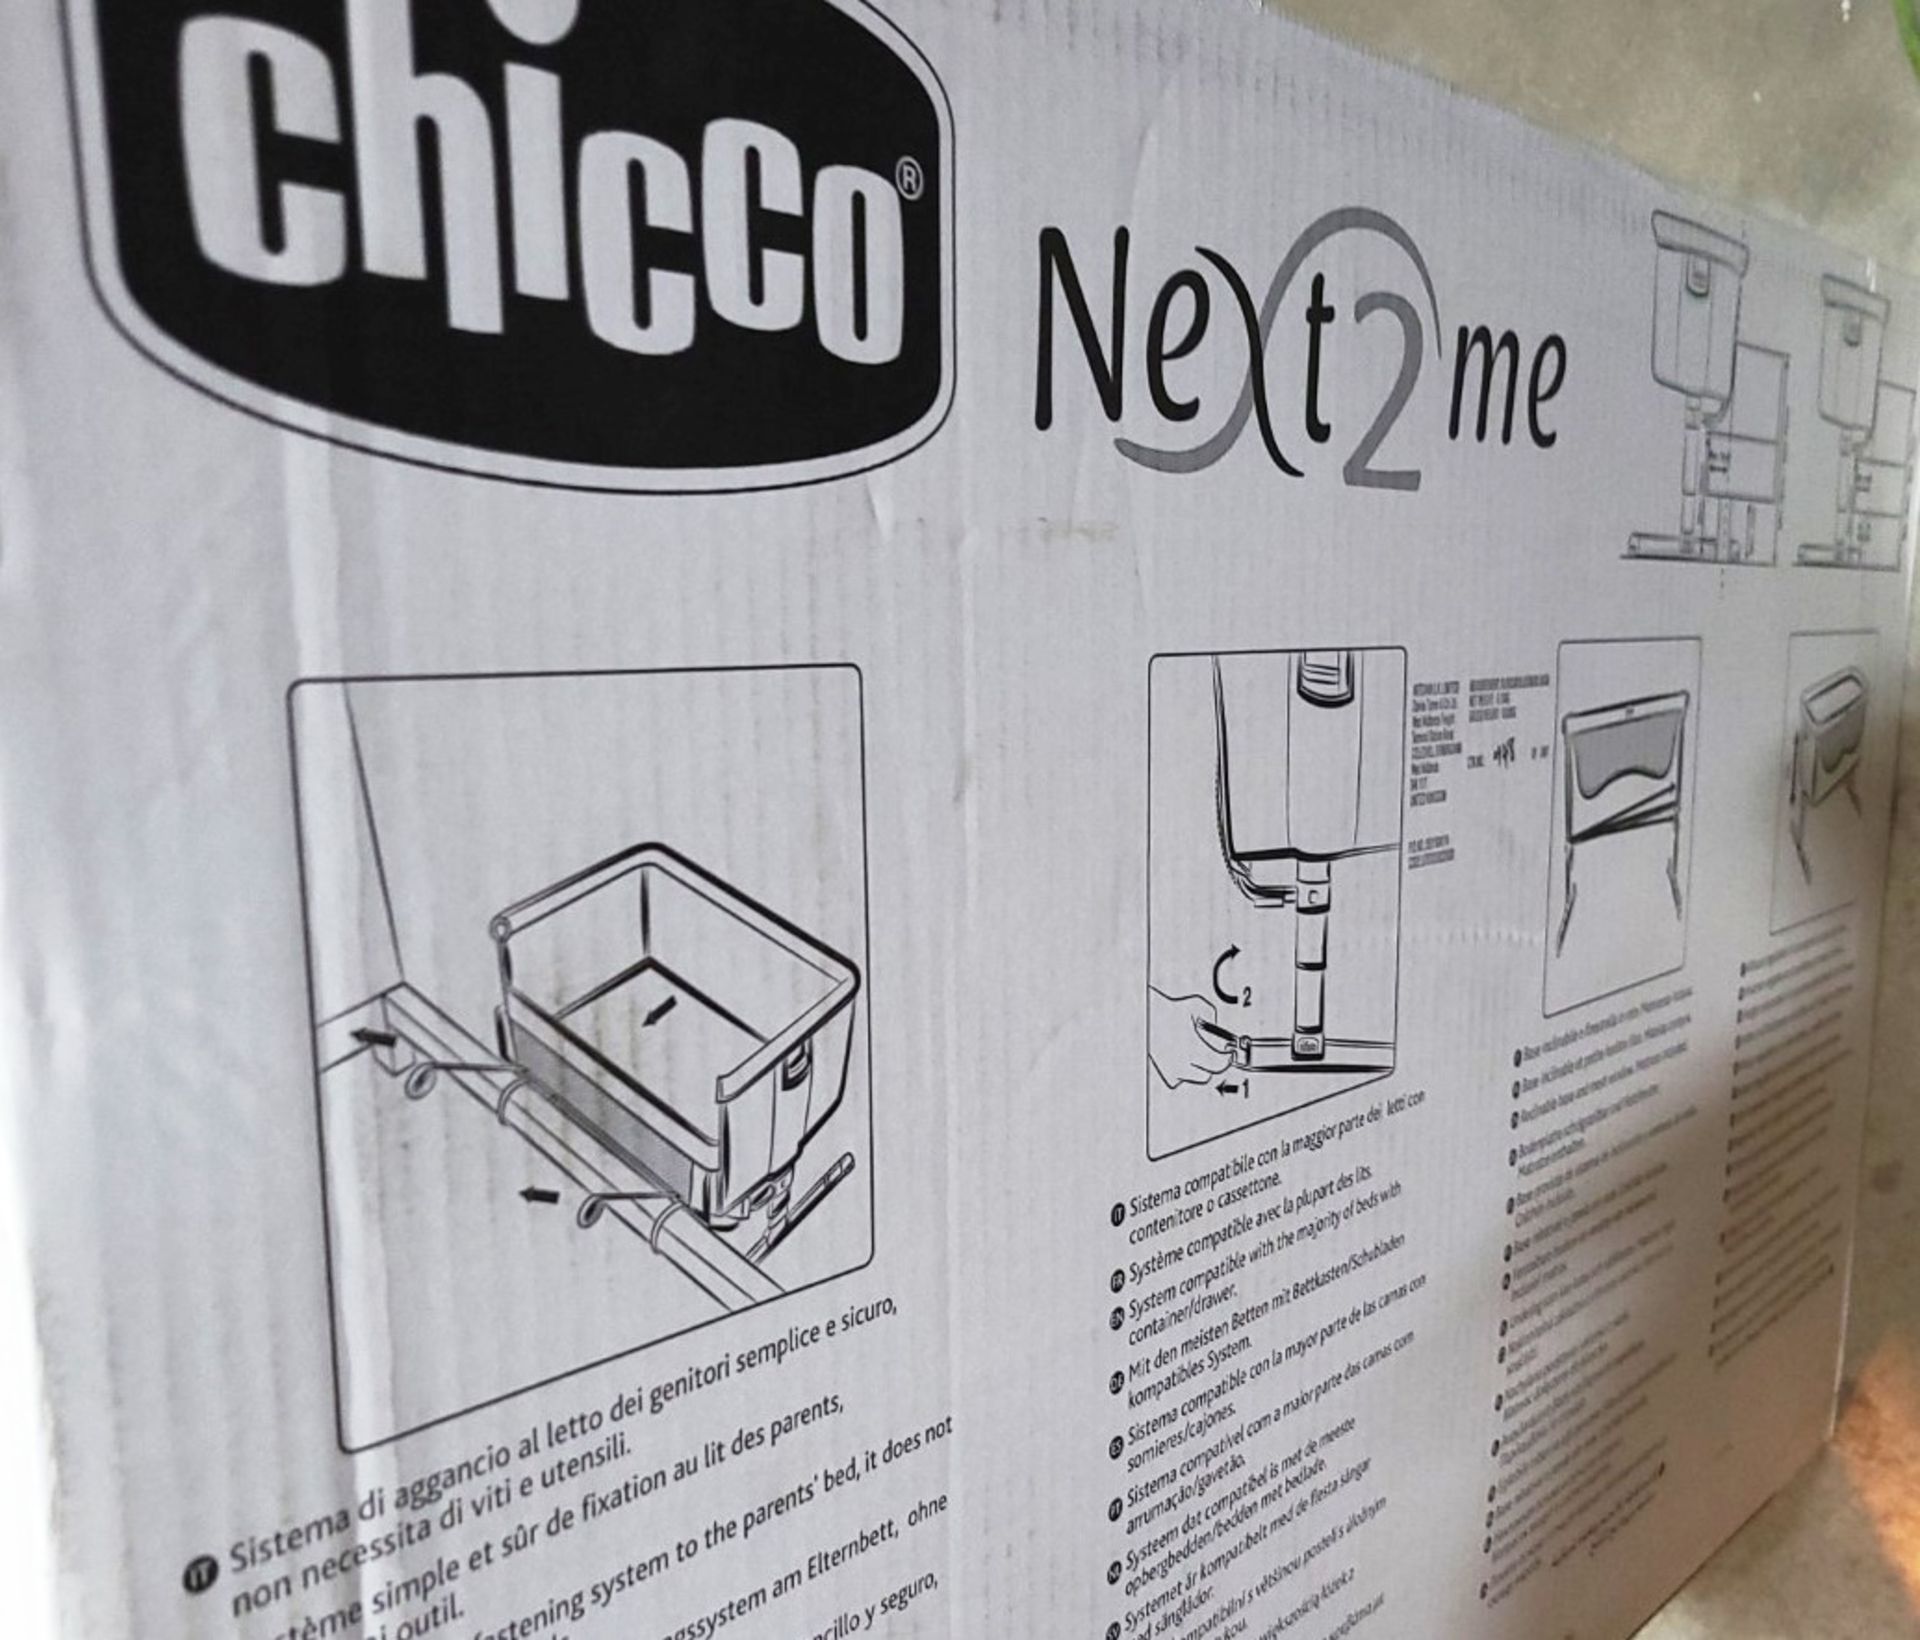 1 x CHICCO Next2me 'Chick to Chick' Bedside Baby Crib With Mattress - New Sealed Stock - RRP £299.00 - Image 4 of 6